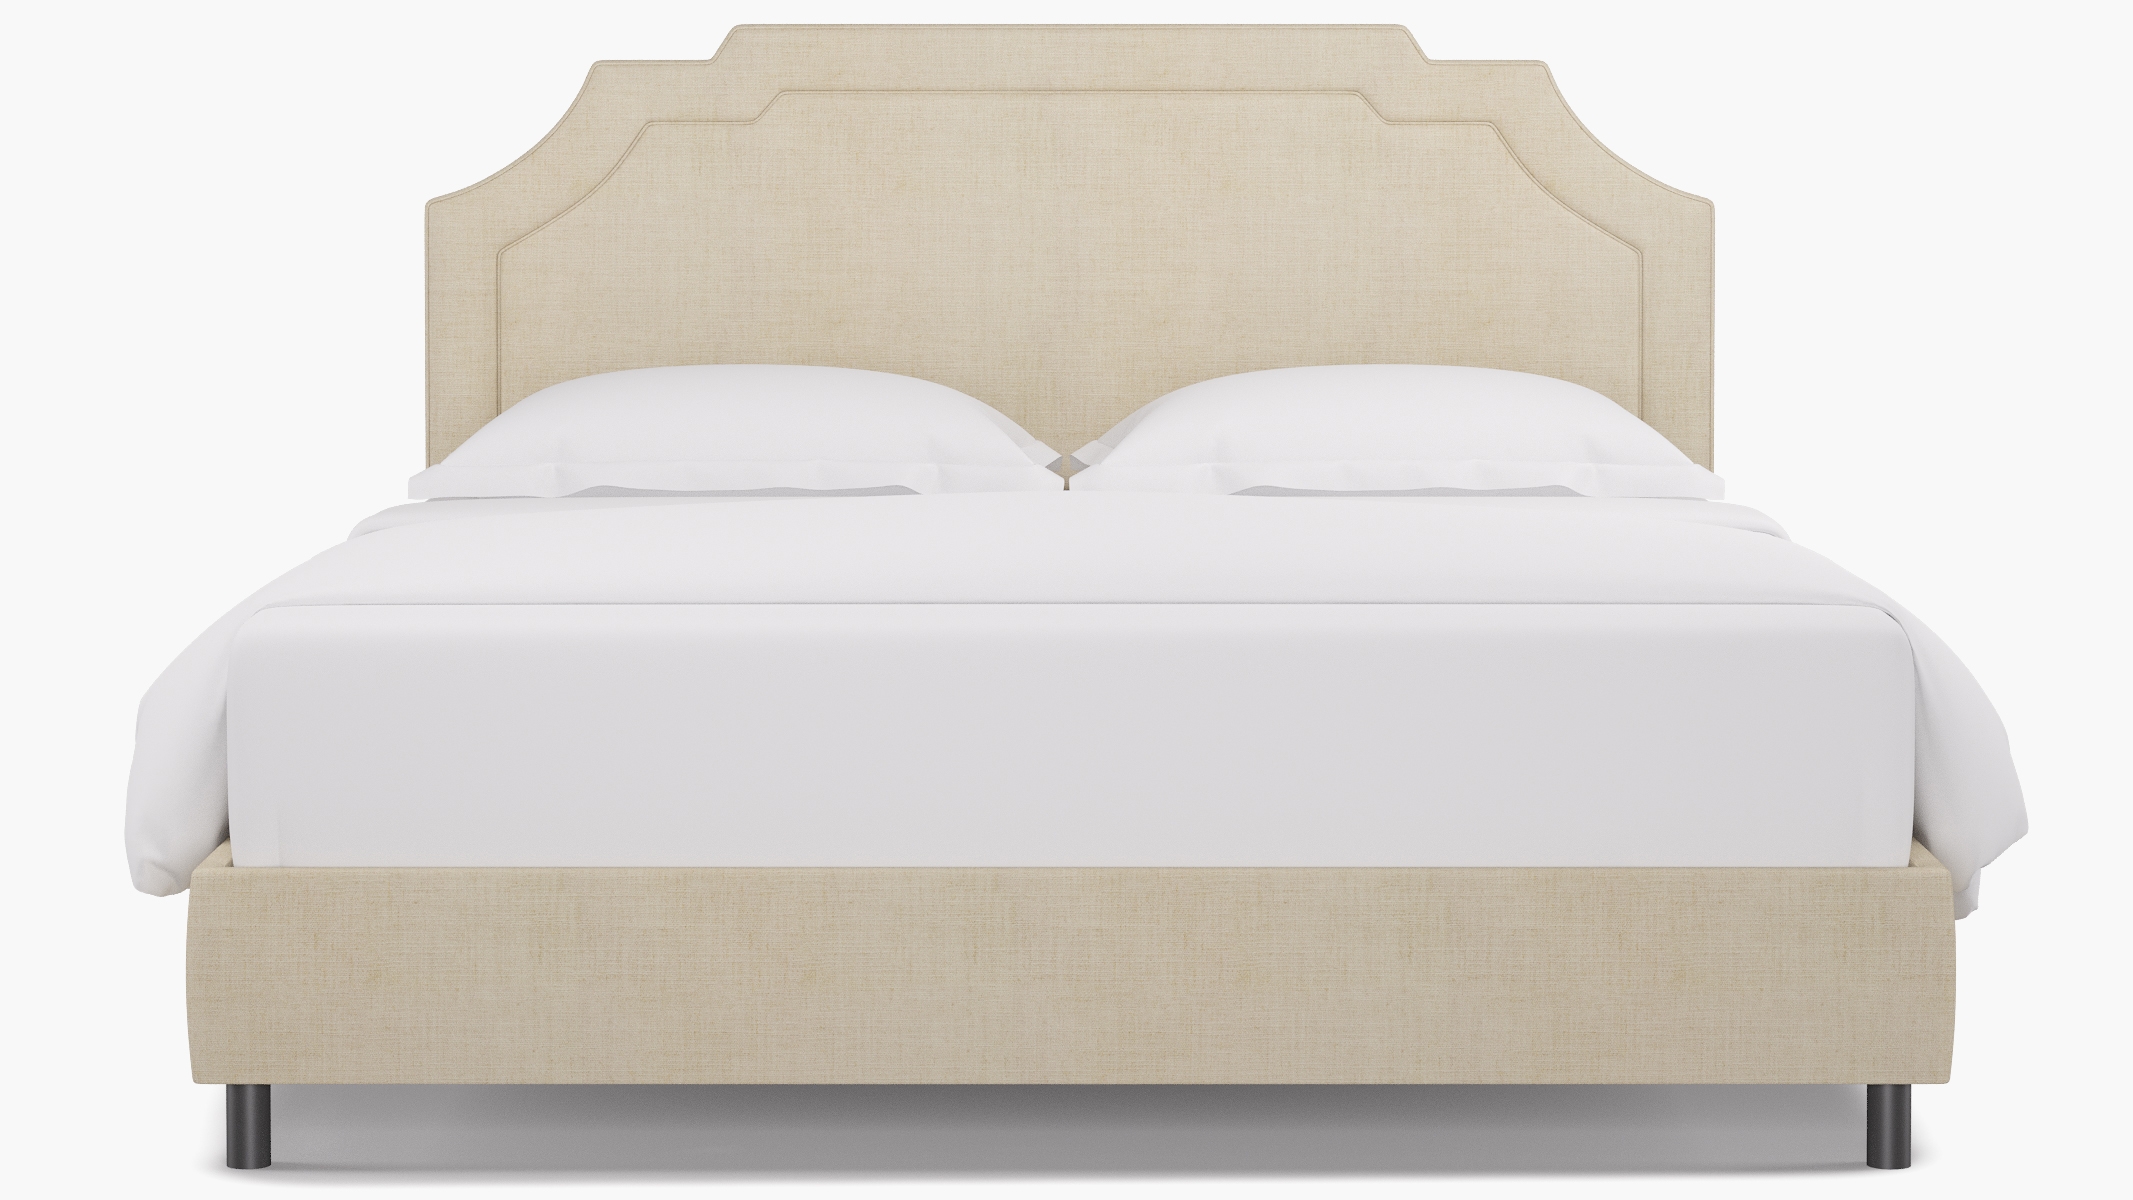 Art Deco Bed, Talc Everyday Linen, King - Image 1